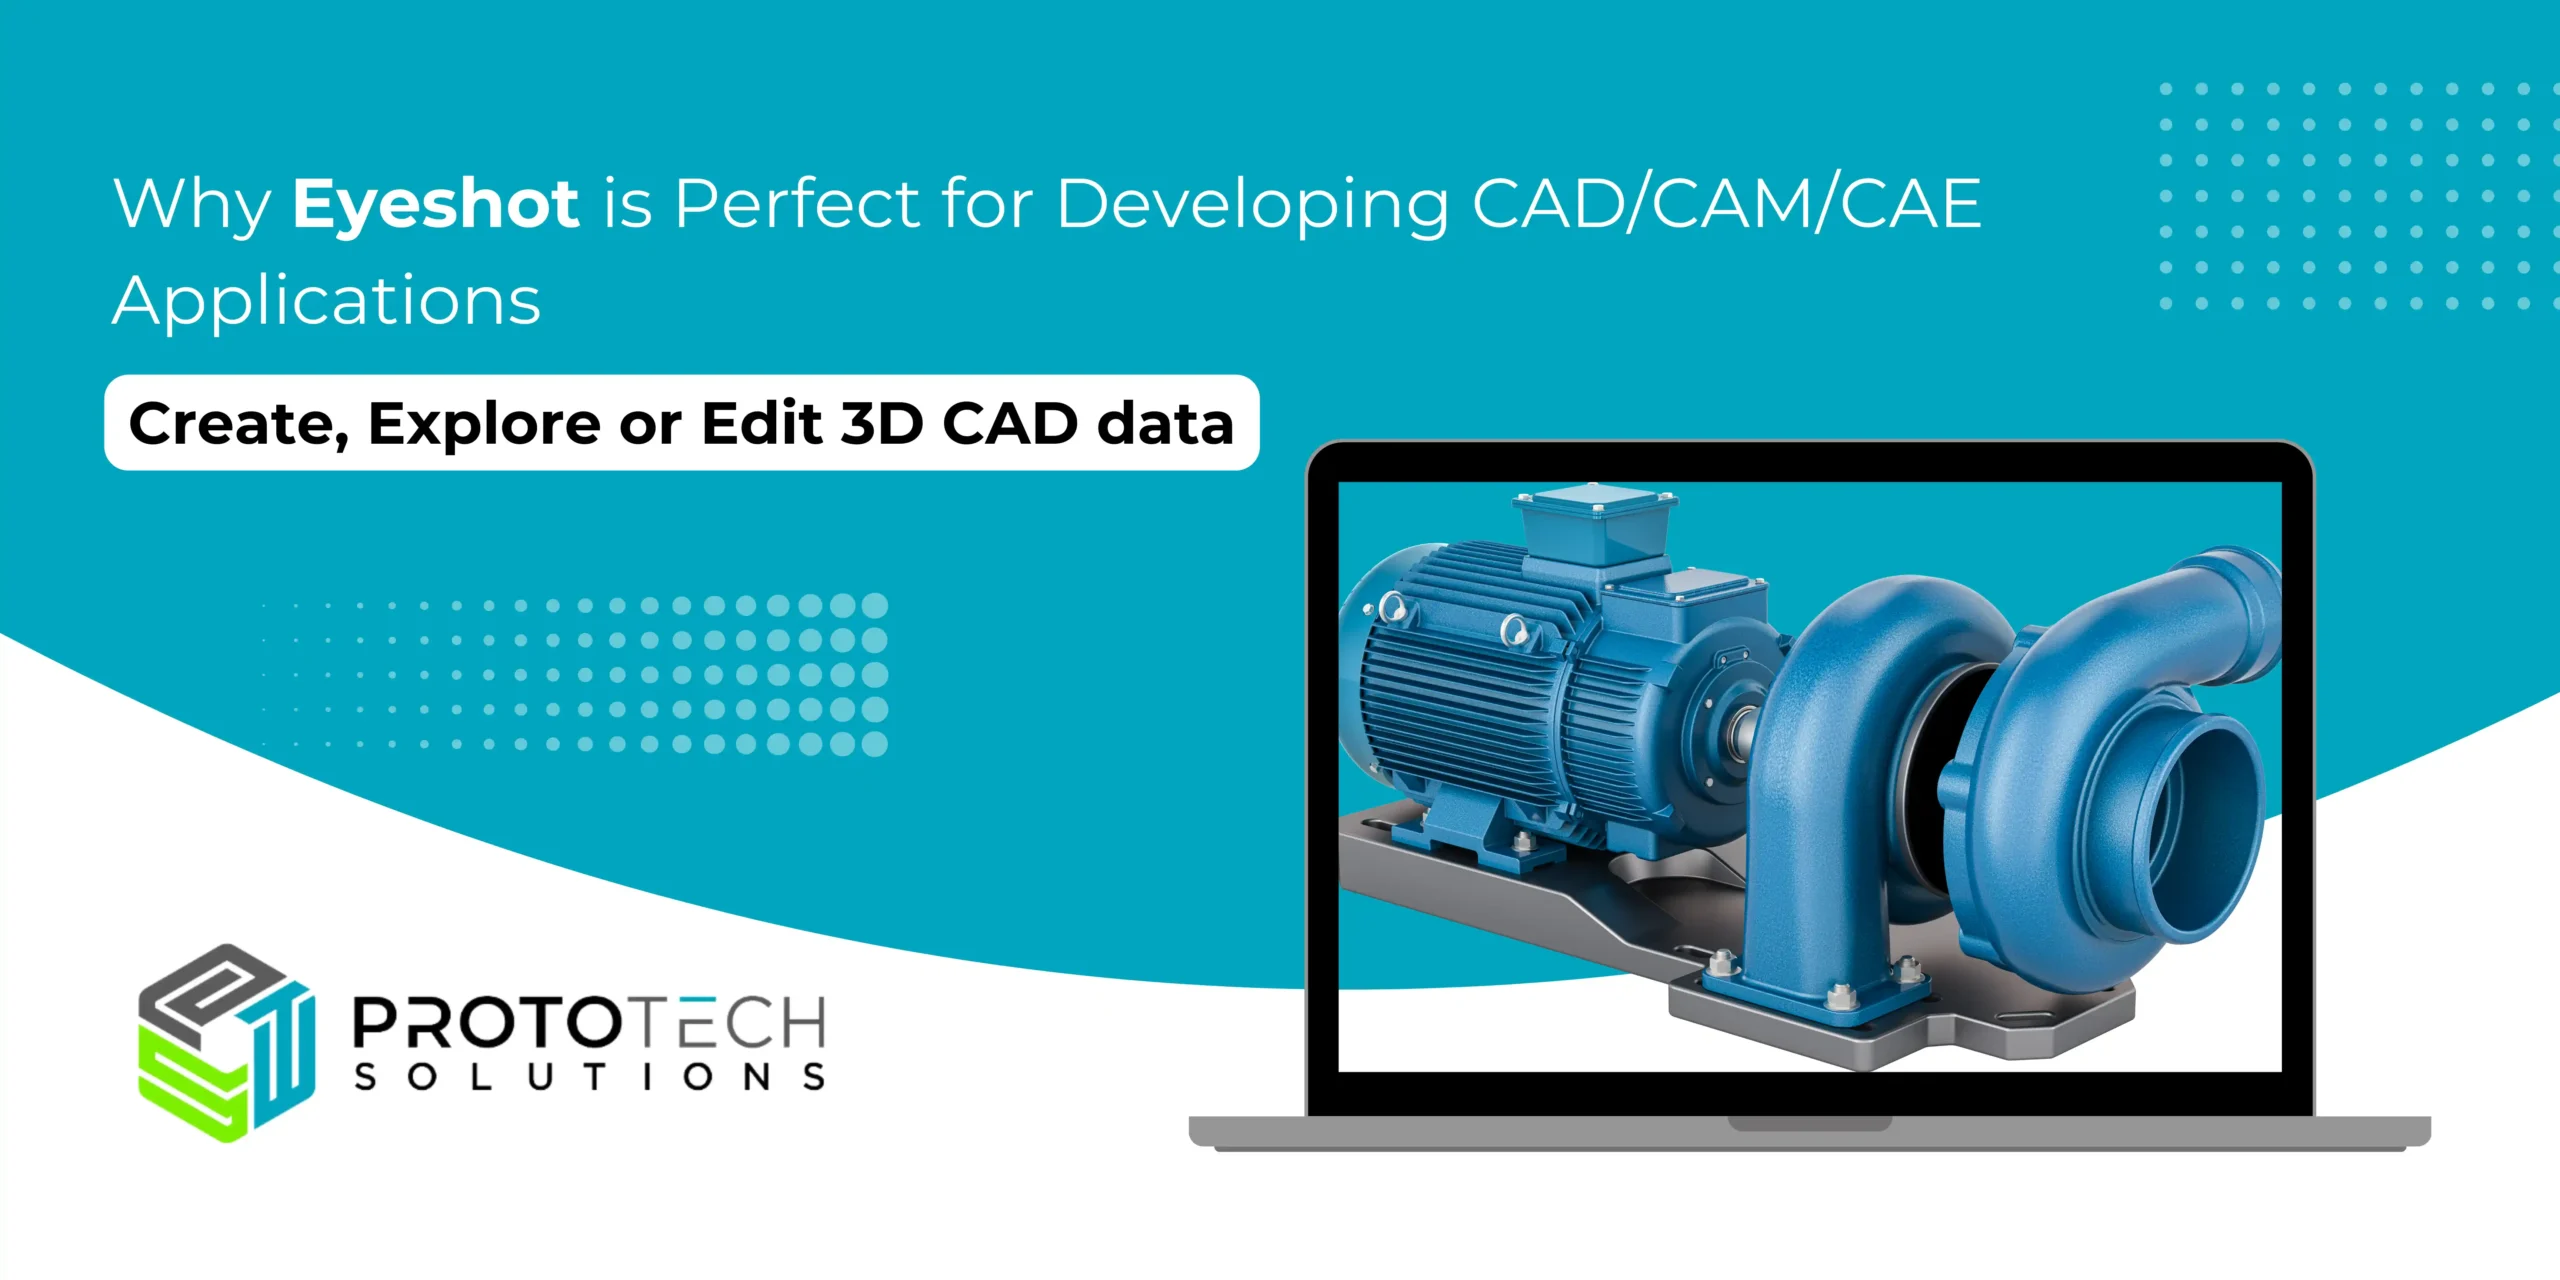 Why Eyeshot is Perfect for Developing CADCAMCAE Applications